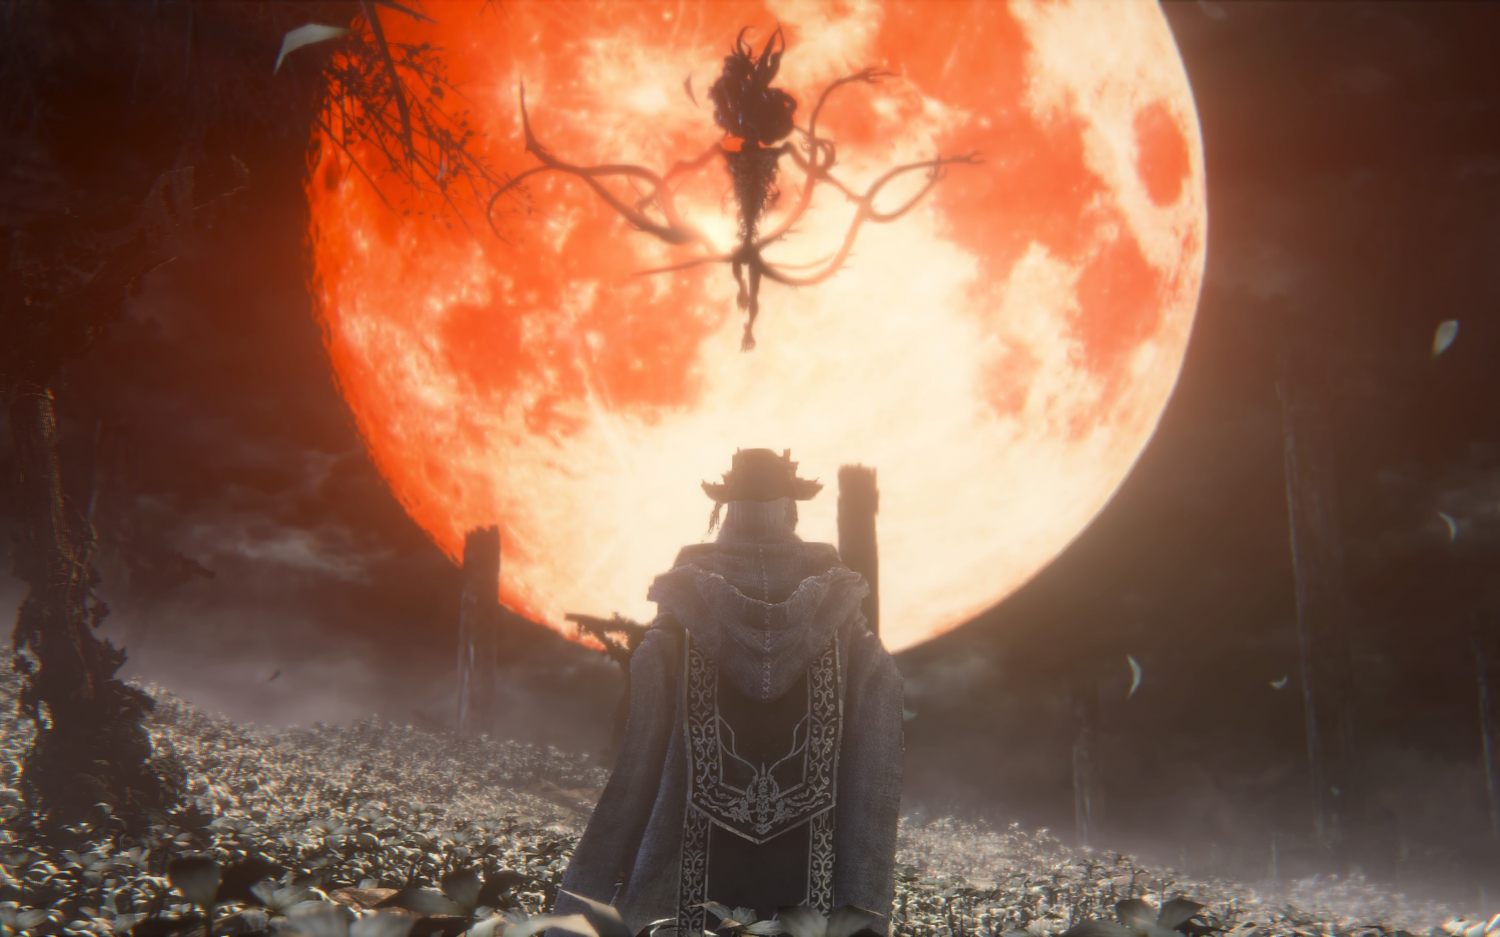 Rumor: Bloodborne coming to PlayStation 5, Steam with 4K 60FPS support